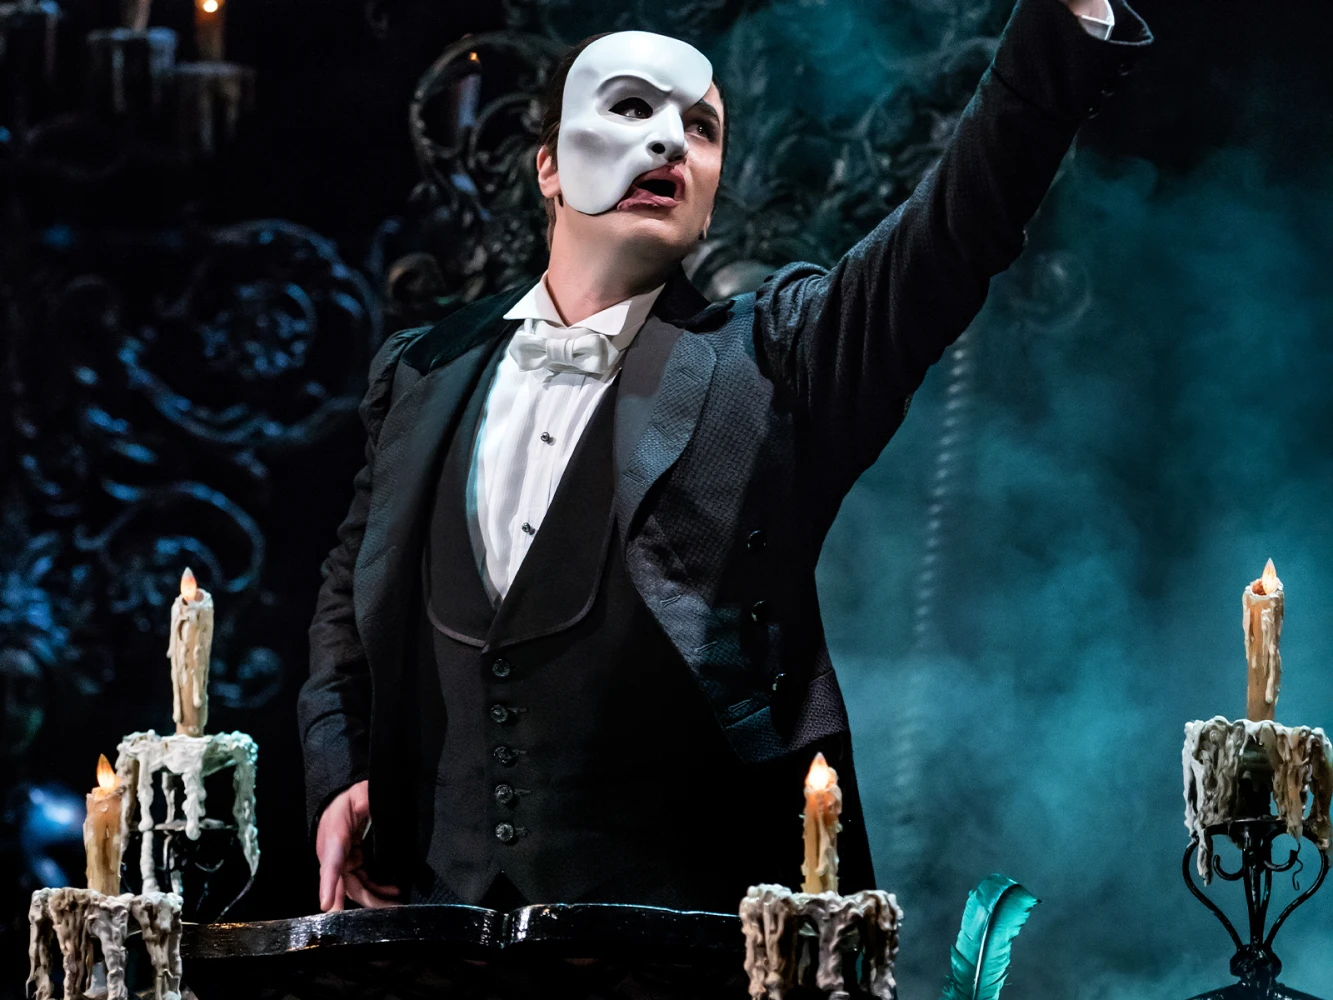 The Phantom of the Opera: What to expect - 6